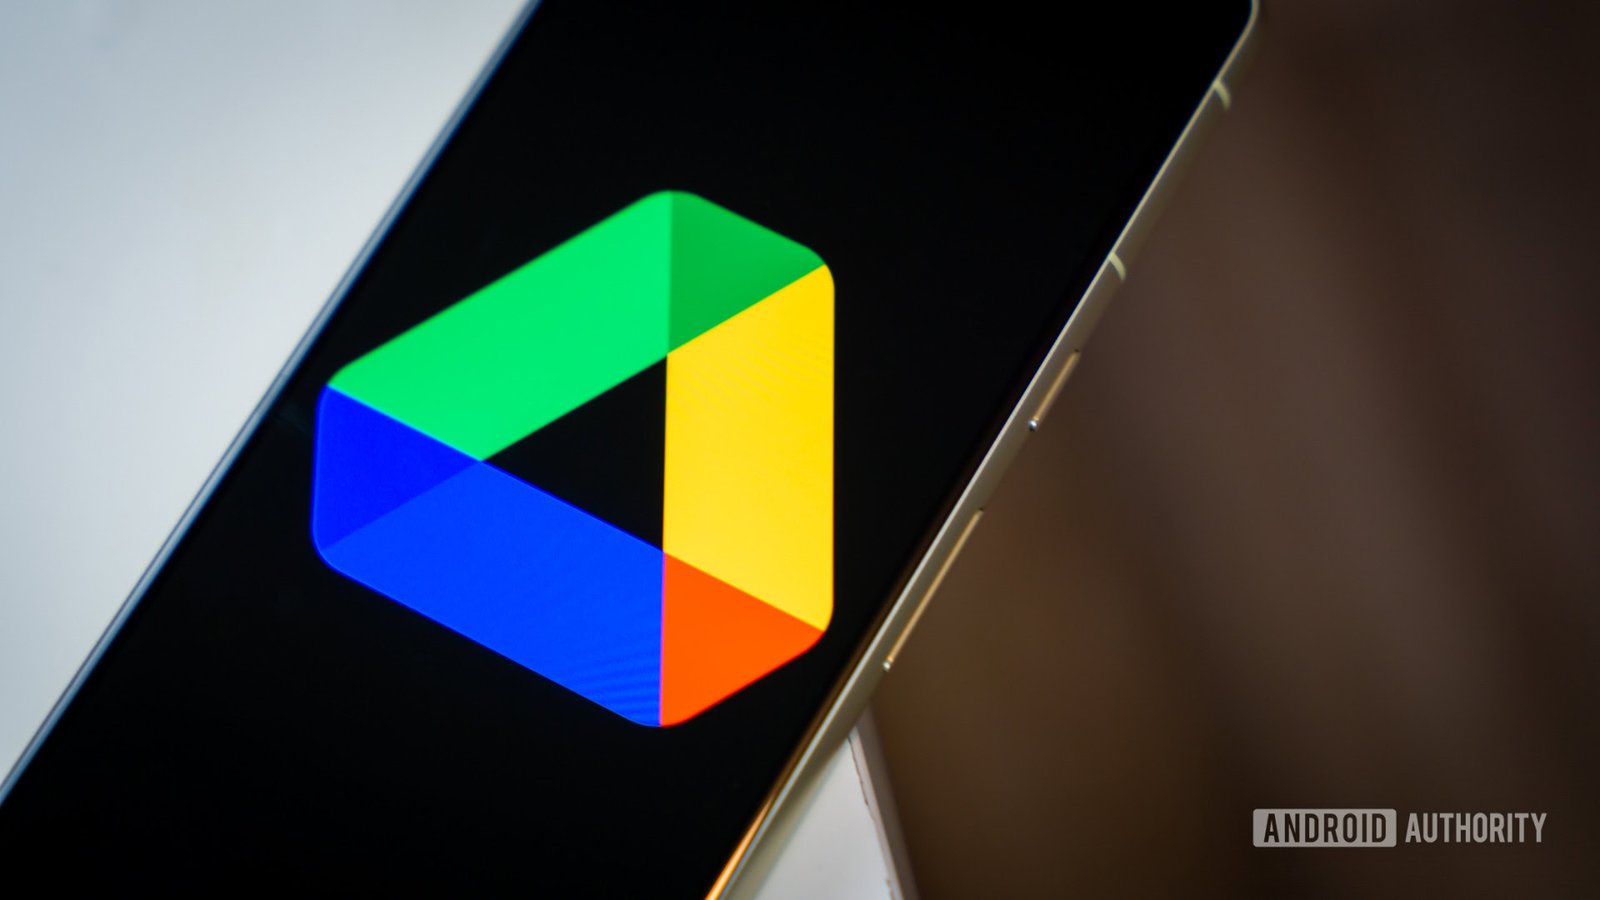 Google Drive could soon let you save scanned documents as JPEGs